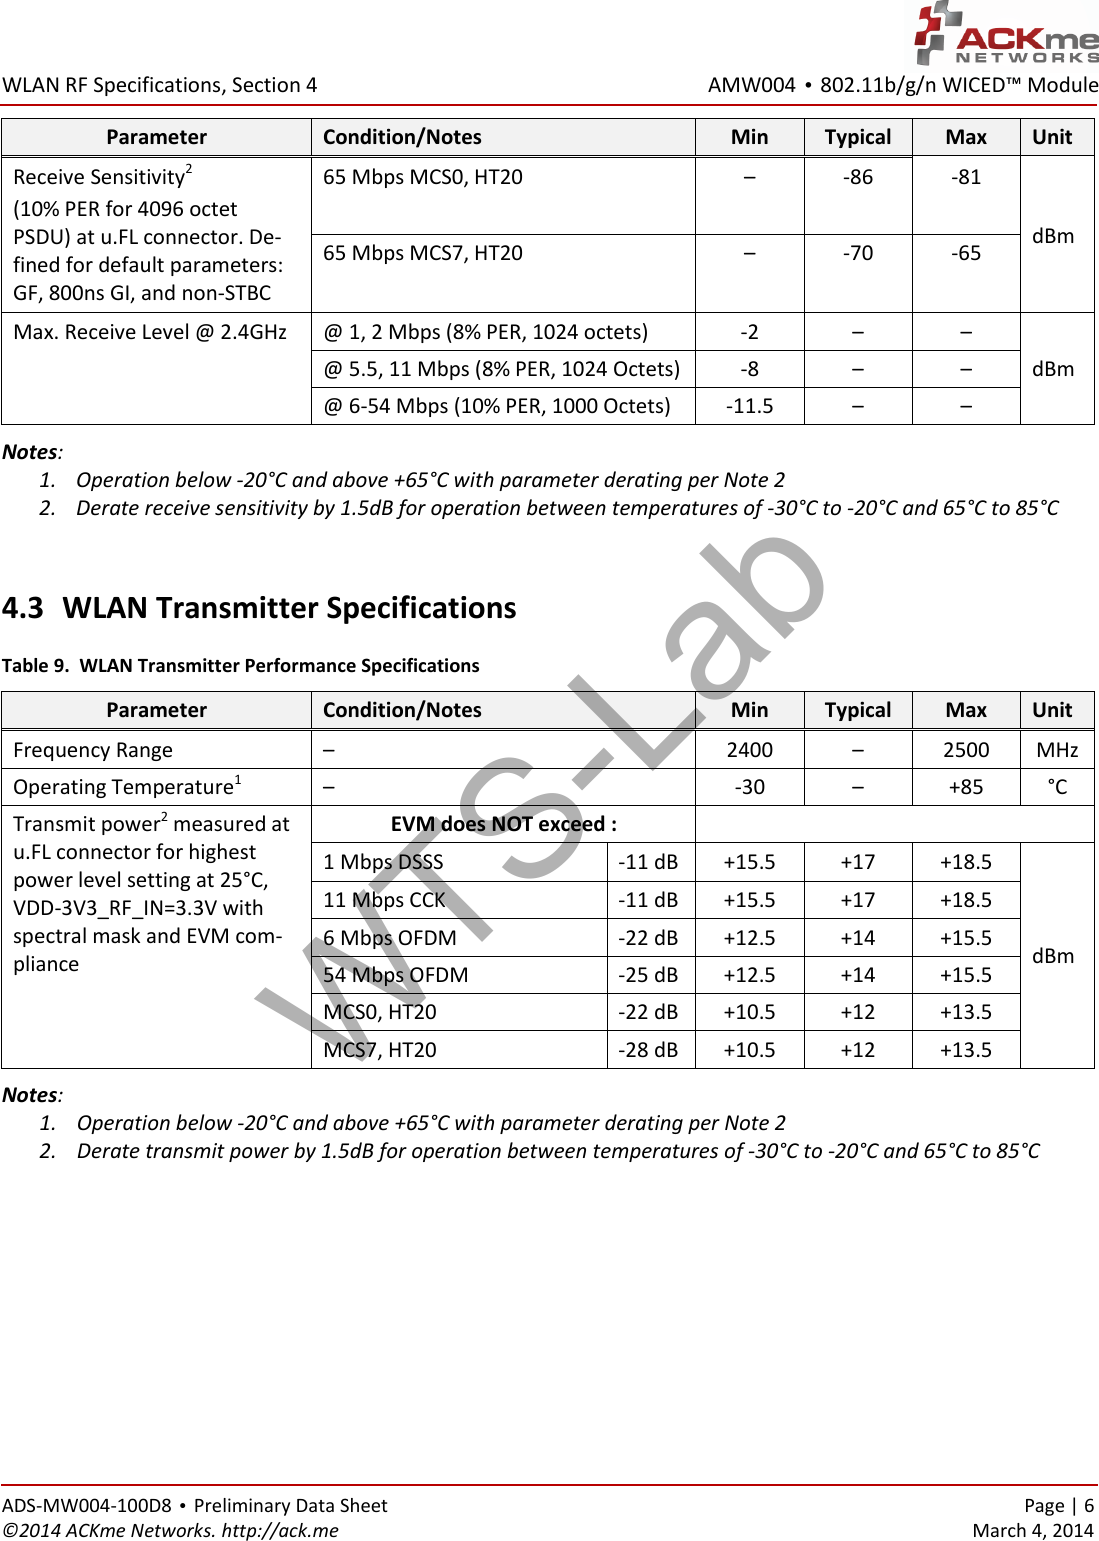 AMW004 • 802.11b/g/n WICED™ Module  WLAN RF Specifications, Section 4 ADS-MW004-100D8 • Preliminary Data Sheet    Page | 6 ©2014 ACKme Networks. http://ack.me    March 4, 2014 Parameter Condition/Notes Min Typical Max Unit Receive Sensitivity2 (10% PER for 4096 octet PSDU) at u.FL connector. De-fined for default parameters: GF, 800ns GI, and non-STBC 65 Mbps MCS0, HT20 – -86 -81 dBm 65 Mbps MCS7, HT20 – -70 -65 Max. Receive Level @ 2.4GHz @ 1, 2 Mbps (8% PER, 1024 octets) -2 – – dBm @ 5.5, 11 Mbps (8% PER, 1024 Octets) -8 – – @ 6-54 Mbps (10% PER, 1000 Octets) -11.5 – – Notes: 1. Operation below -20°C and above +65°C with parameter derating per Note 2 2. Derate receive sensitivity by 1.5dB for operation between temperatures of -30°C to -20°C and 65°C to 85°C  4.3 WLAN Transmitter Specifications Table 9.  WLAN Transmitter Performance Specifications Parameter Condition/Notes Min Typical Max Unit Frequency Range –  2400 – 2500 MHz Operating Temperature1 – -30 – +85 °C Transmit power2 measured at u.FL connector for highest power level setting at 25°C, VDD-3V3_RF_IN=3.3V with spectral mask and EVM com-pliance EVM does NOT exceed :  1 Mbps DSSS -11 dB +15.5 +17 +18.5 dBm 11 Mbps CCK -11 dB +15.5 +17 +18.5 6 Mbps OFDM -22 dB +12.5 +14 +15.5 54 Mbps OFDM -25 dB +12.5 +14 +15.5 MCS0, HT20 -22 dB +10.5 +12 +13.5 MCS7, HT20 -28 dB +10.5 +12 +13.5 Notes: 1. Operation below -20°C and above +65°C with parameter derating per Note 2 2. Derate transmit power by 1.5dB for operation between temperatures of -30°C to -20°C and 65°C to 85°C  WTS-Lab